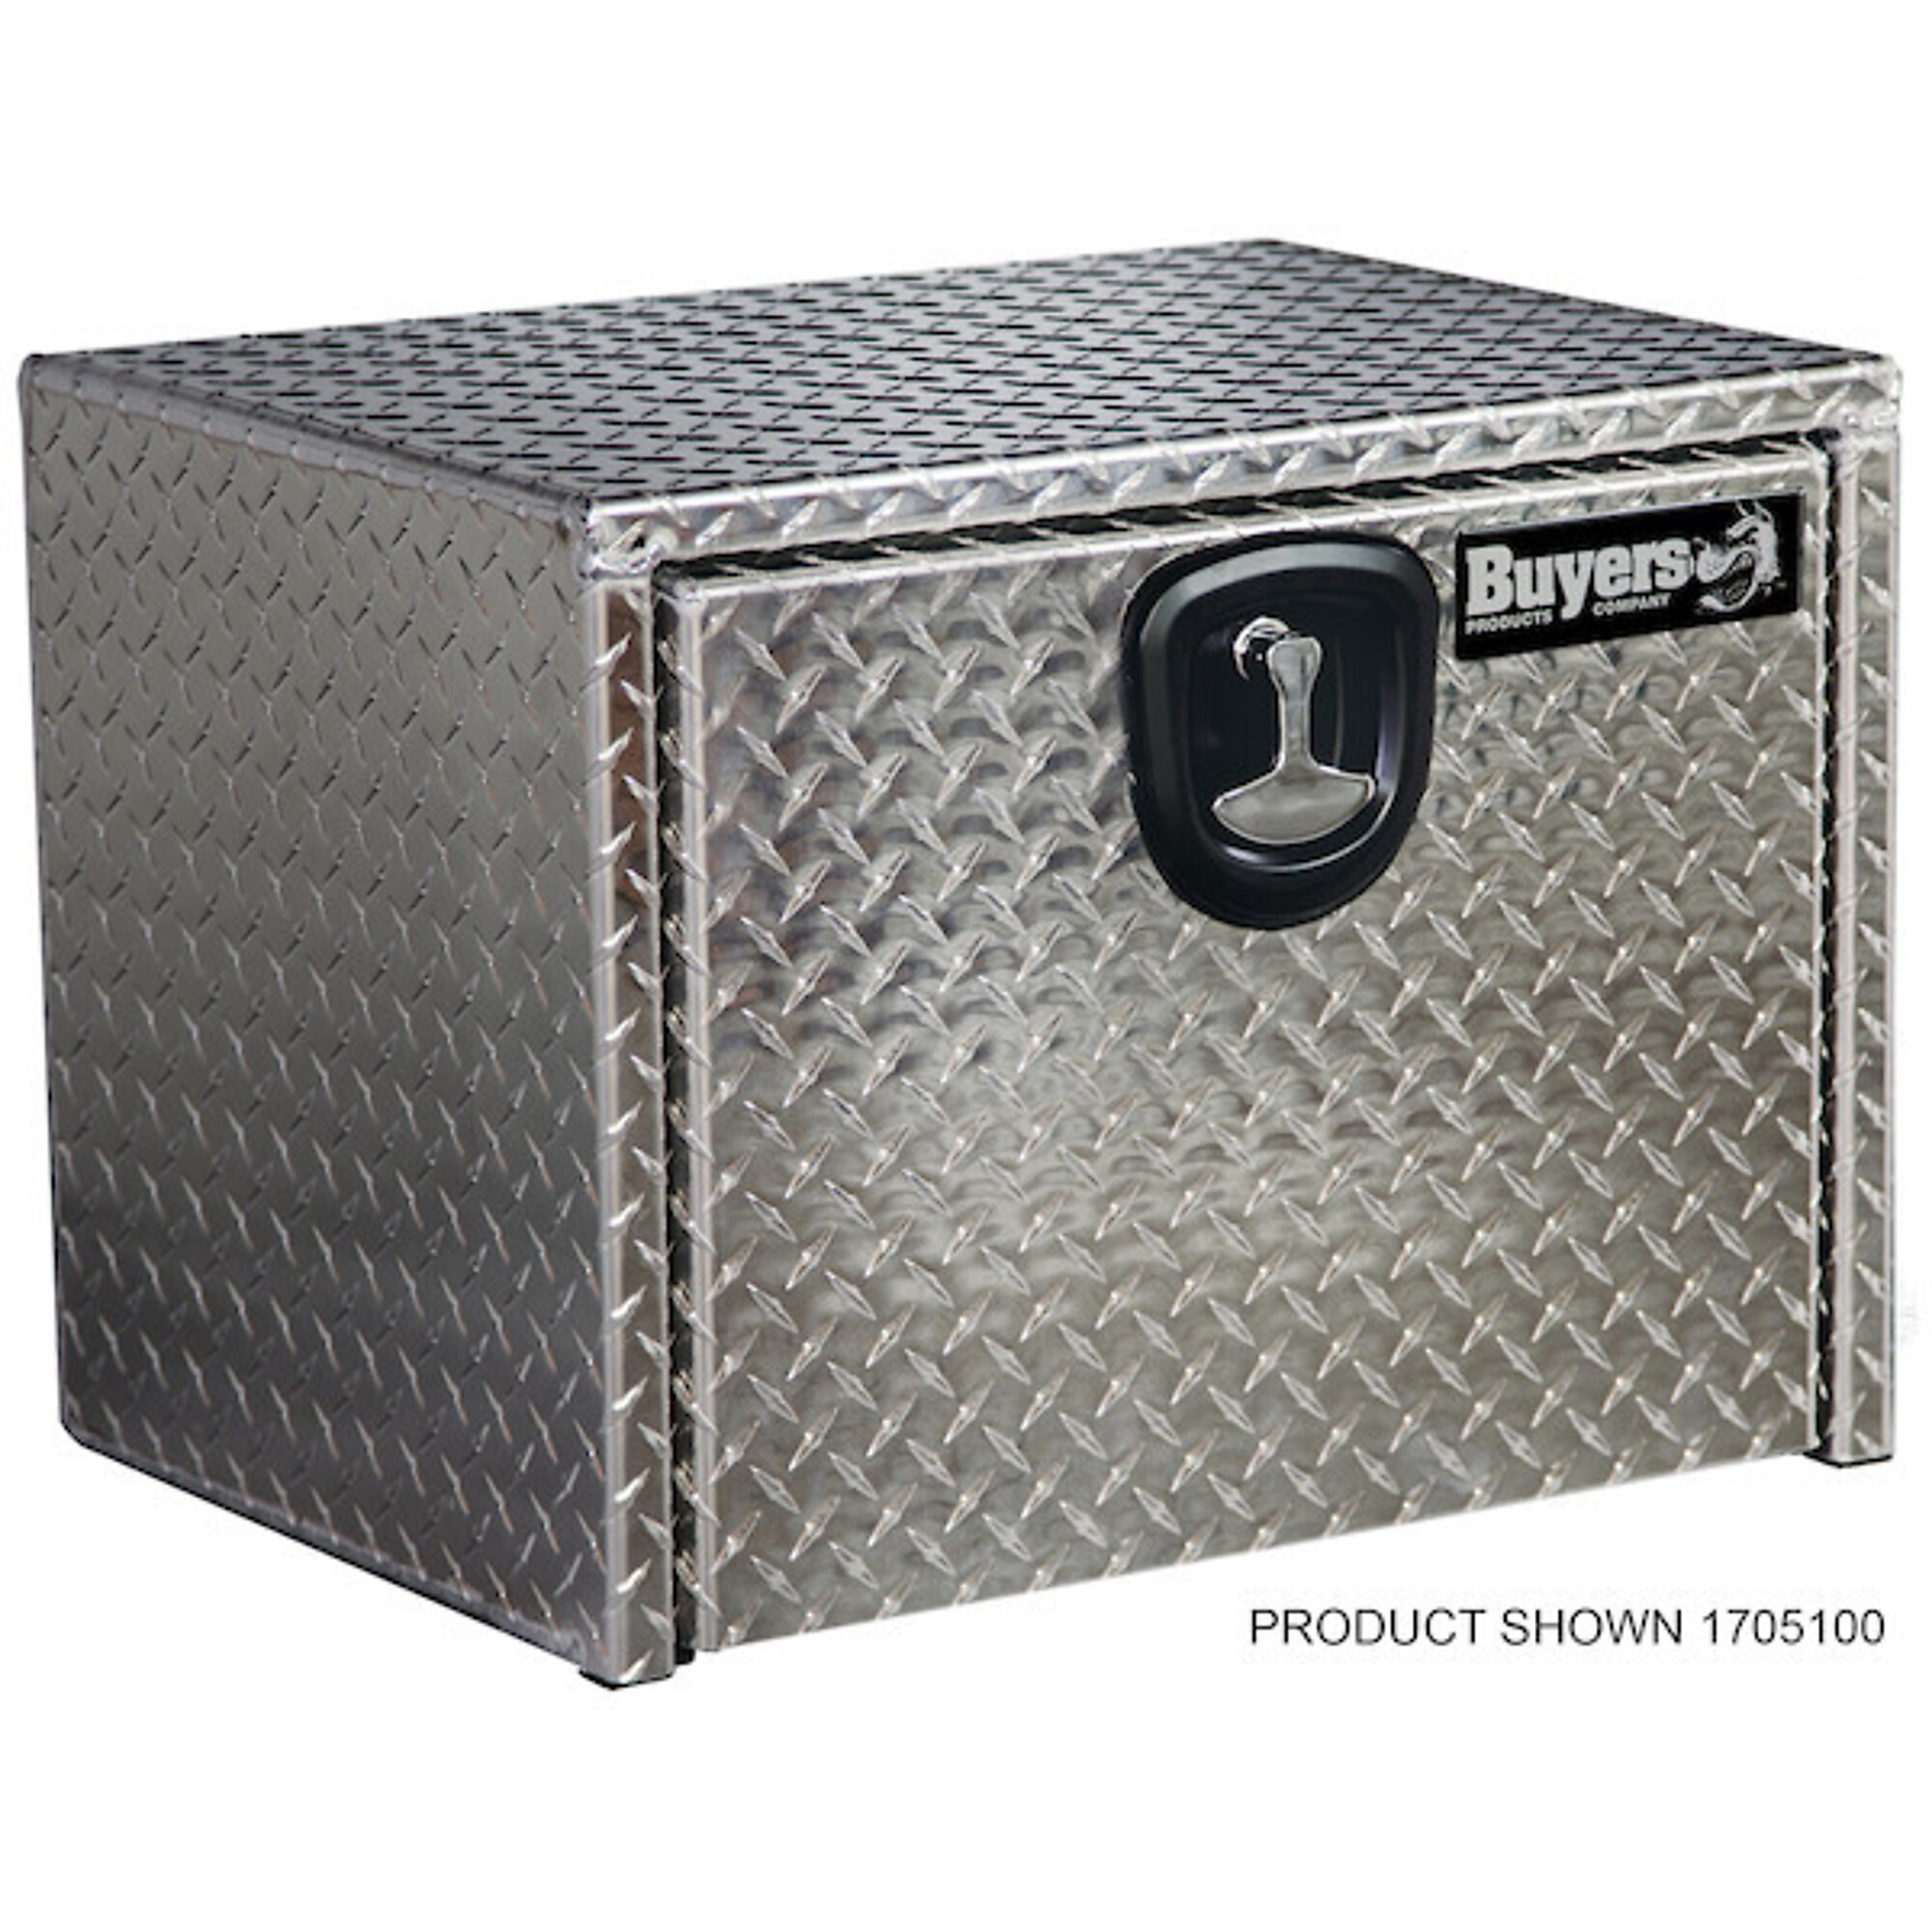 Buyers Products, Underbody Truck Box, Width 24 in, Material Aluminum, Color Finish Diamond Plate Silver, Model 1705130